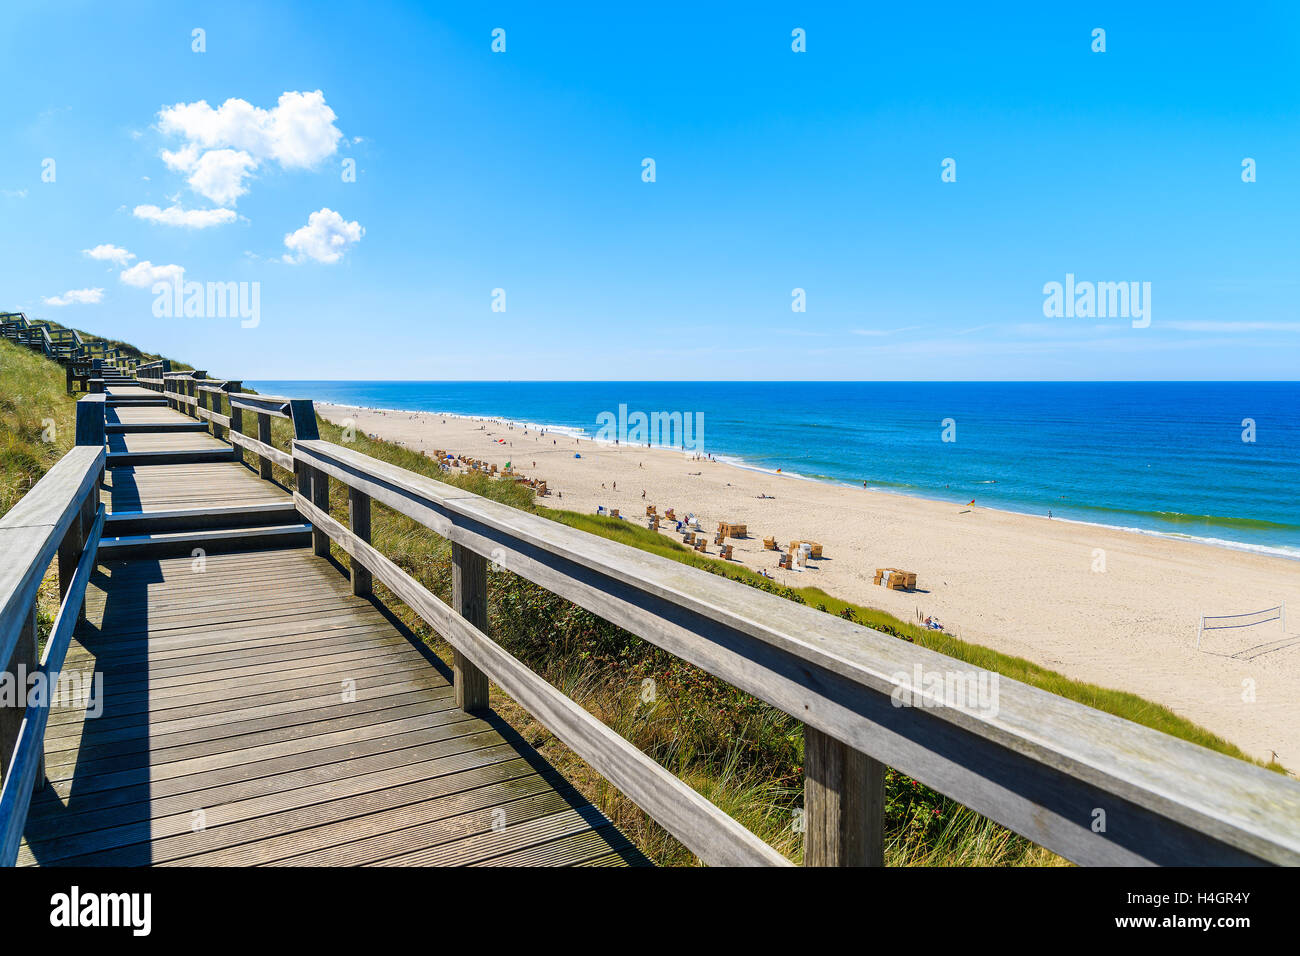 Wooden walkway on sand dune overlooking beach in Wenningstedt, Sylt island, Germany Stock Photo